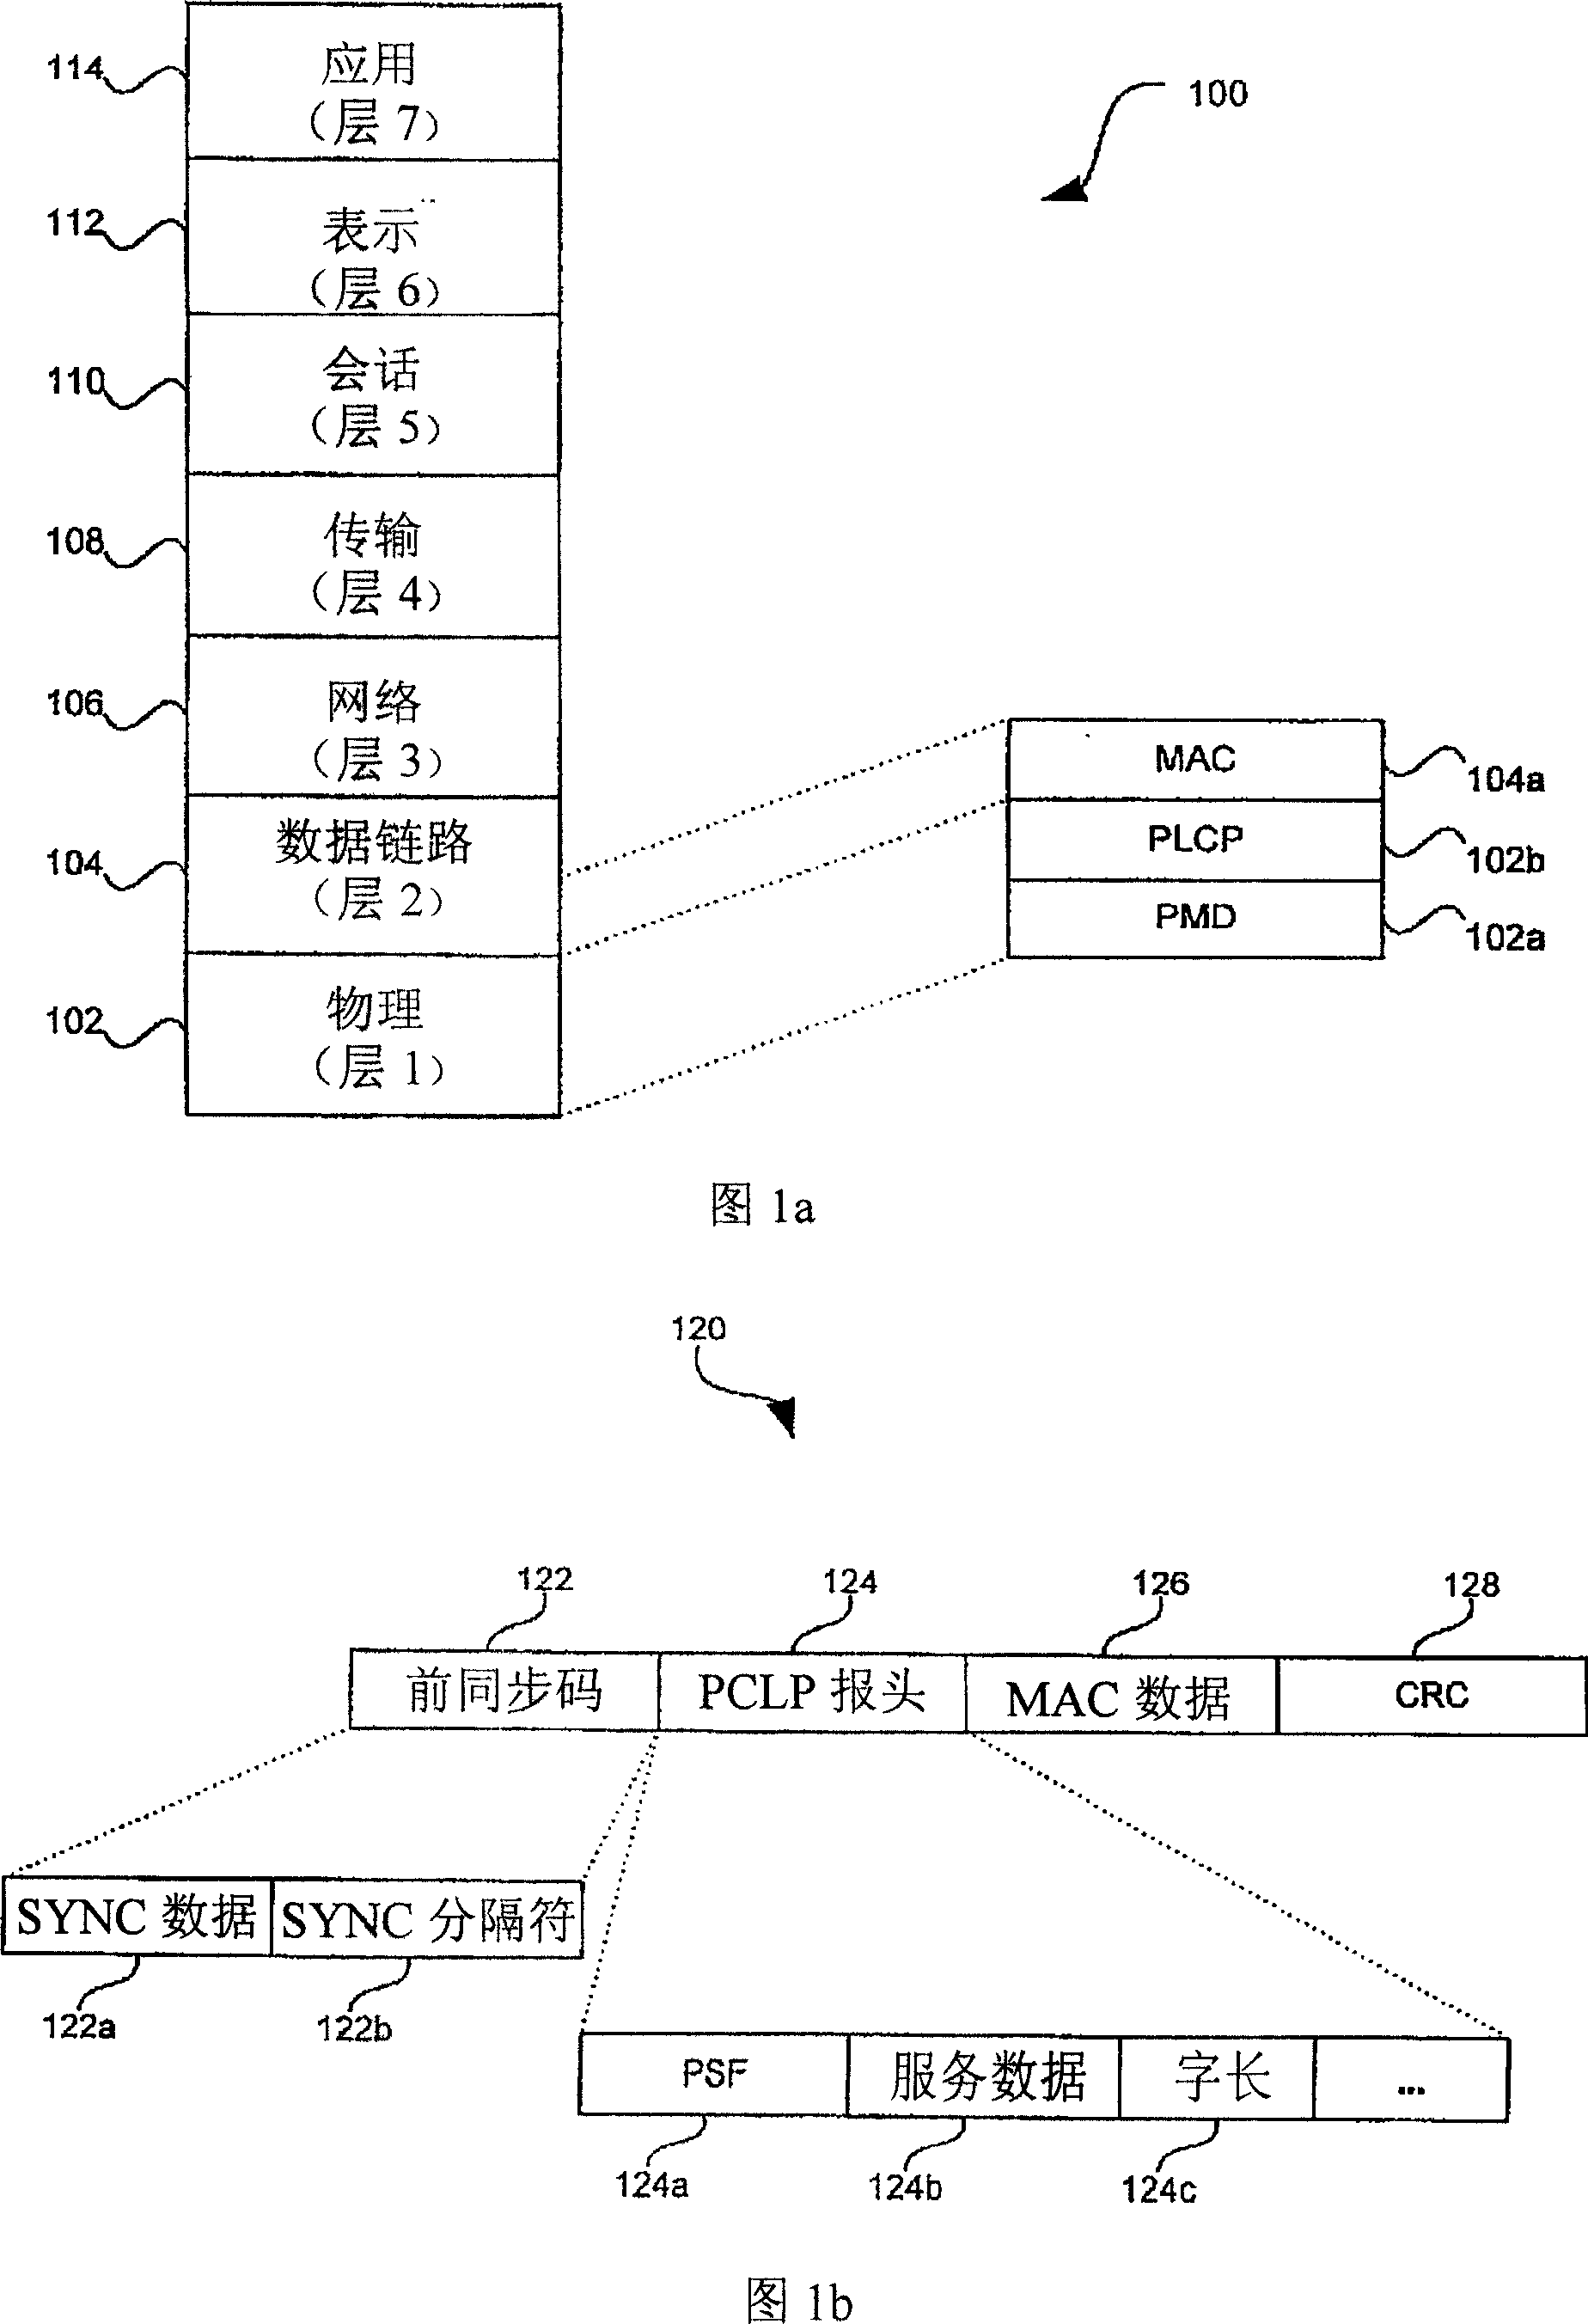 System and method for providing a super channel in a multi-band multi-protocol hybrid wired/wireless network